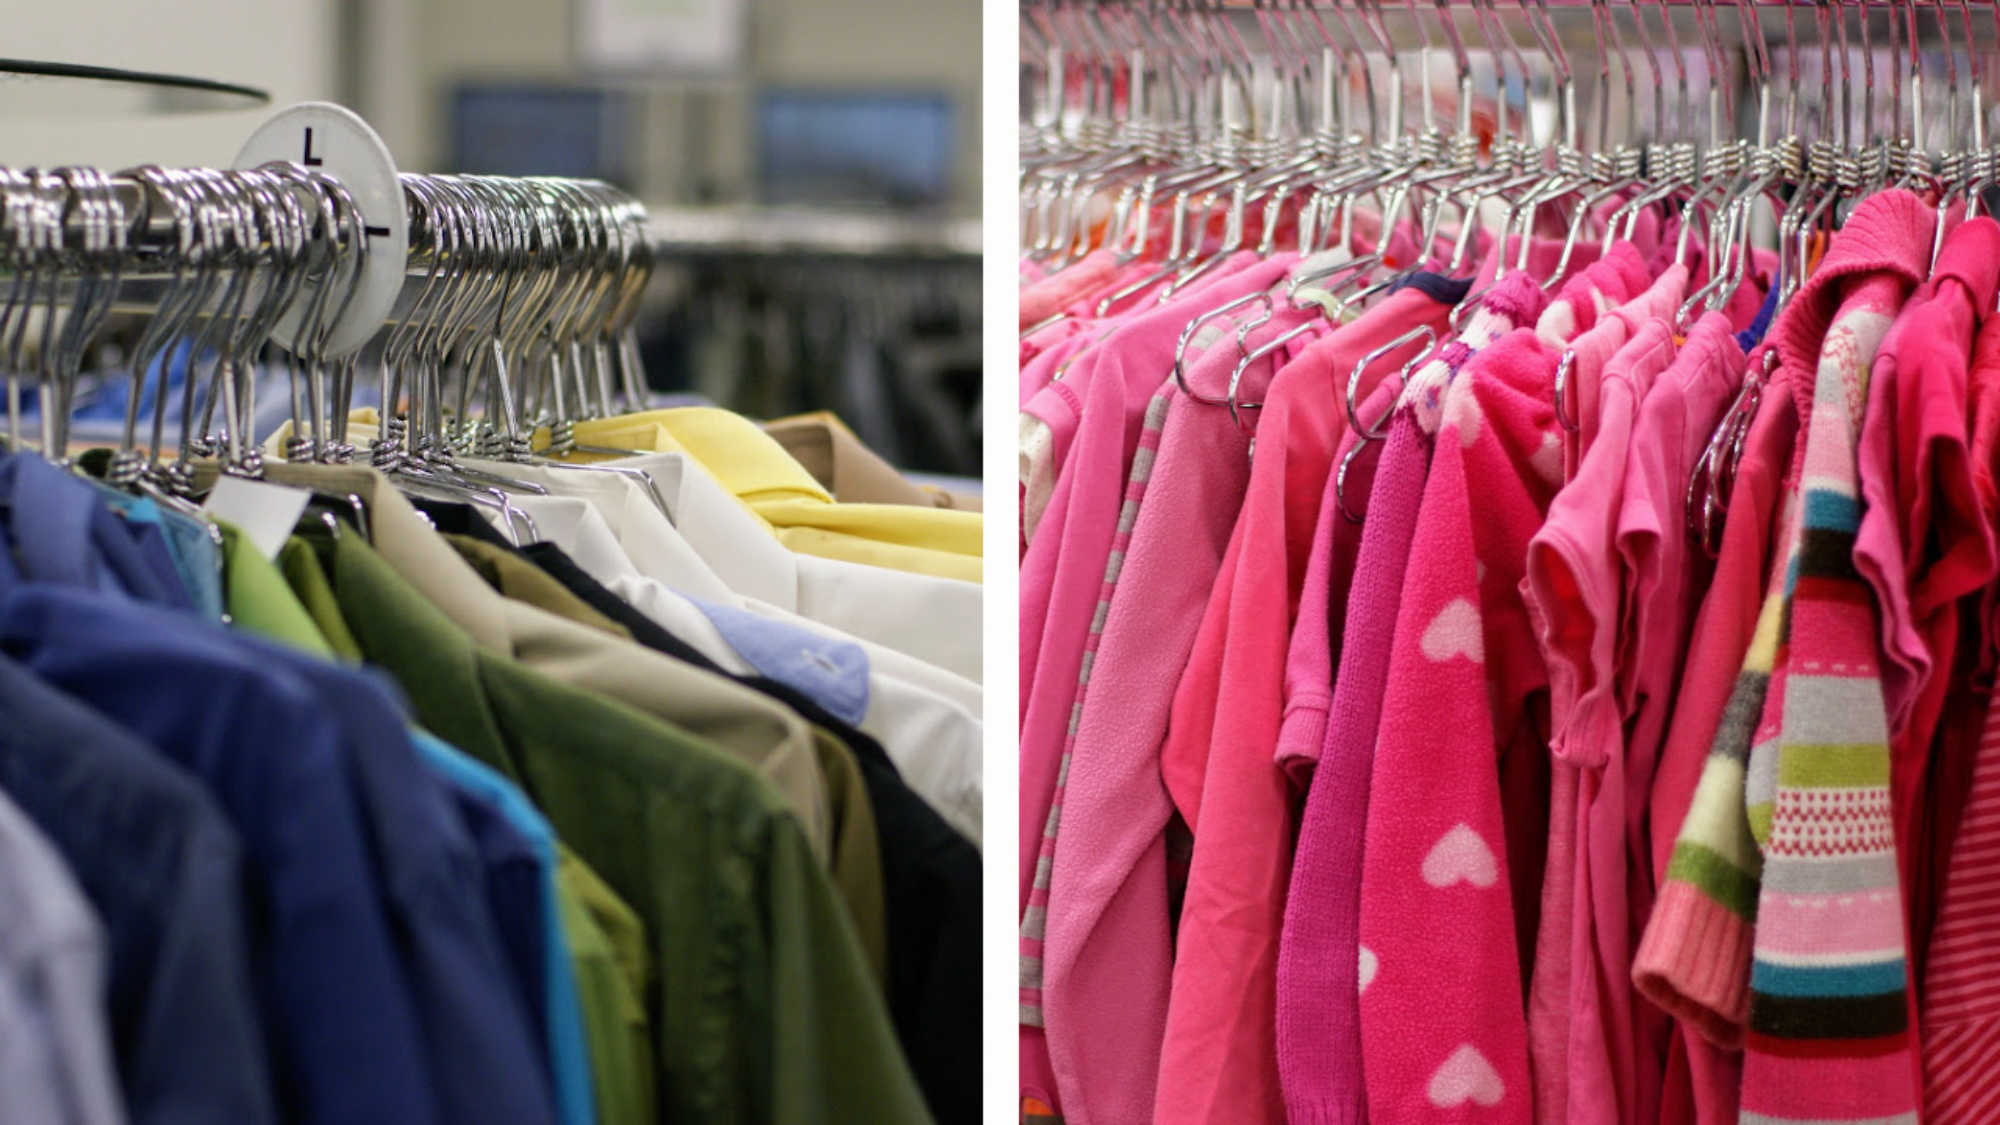 On the left, a rack of blue and green men's dress shirts at DI on the right, a DI rack full of pink clothing for children.